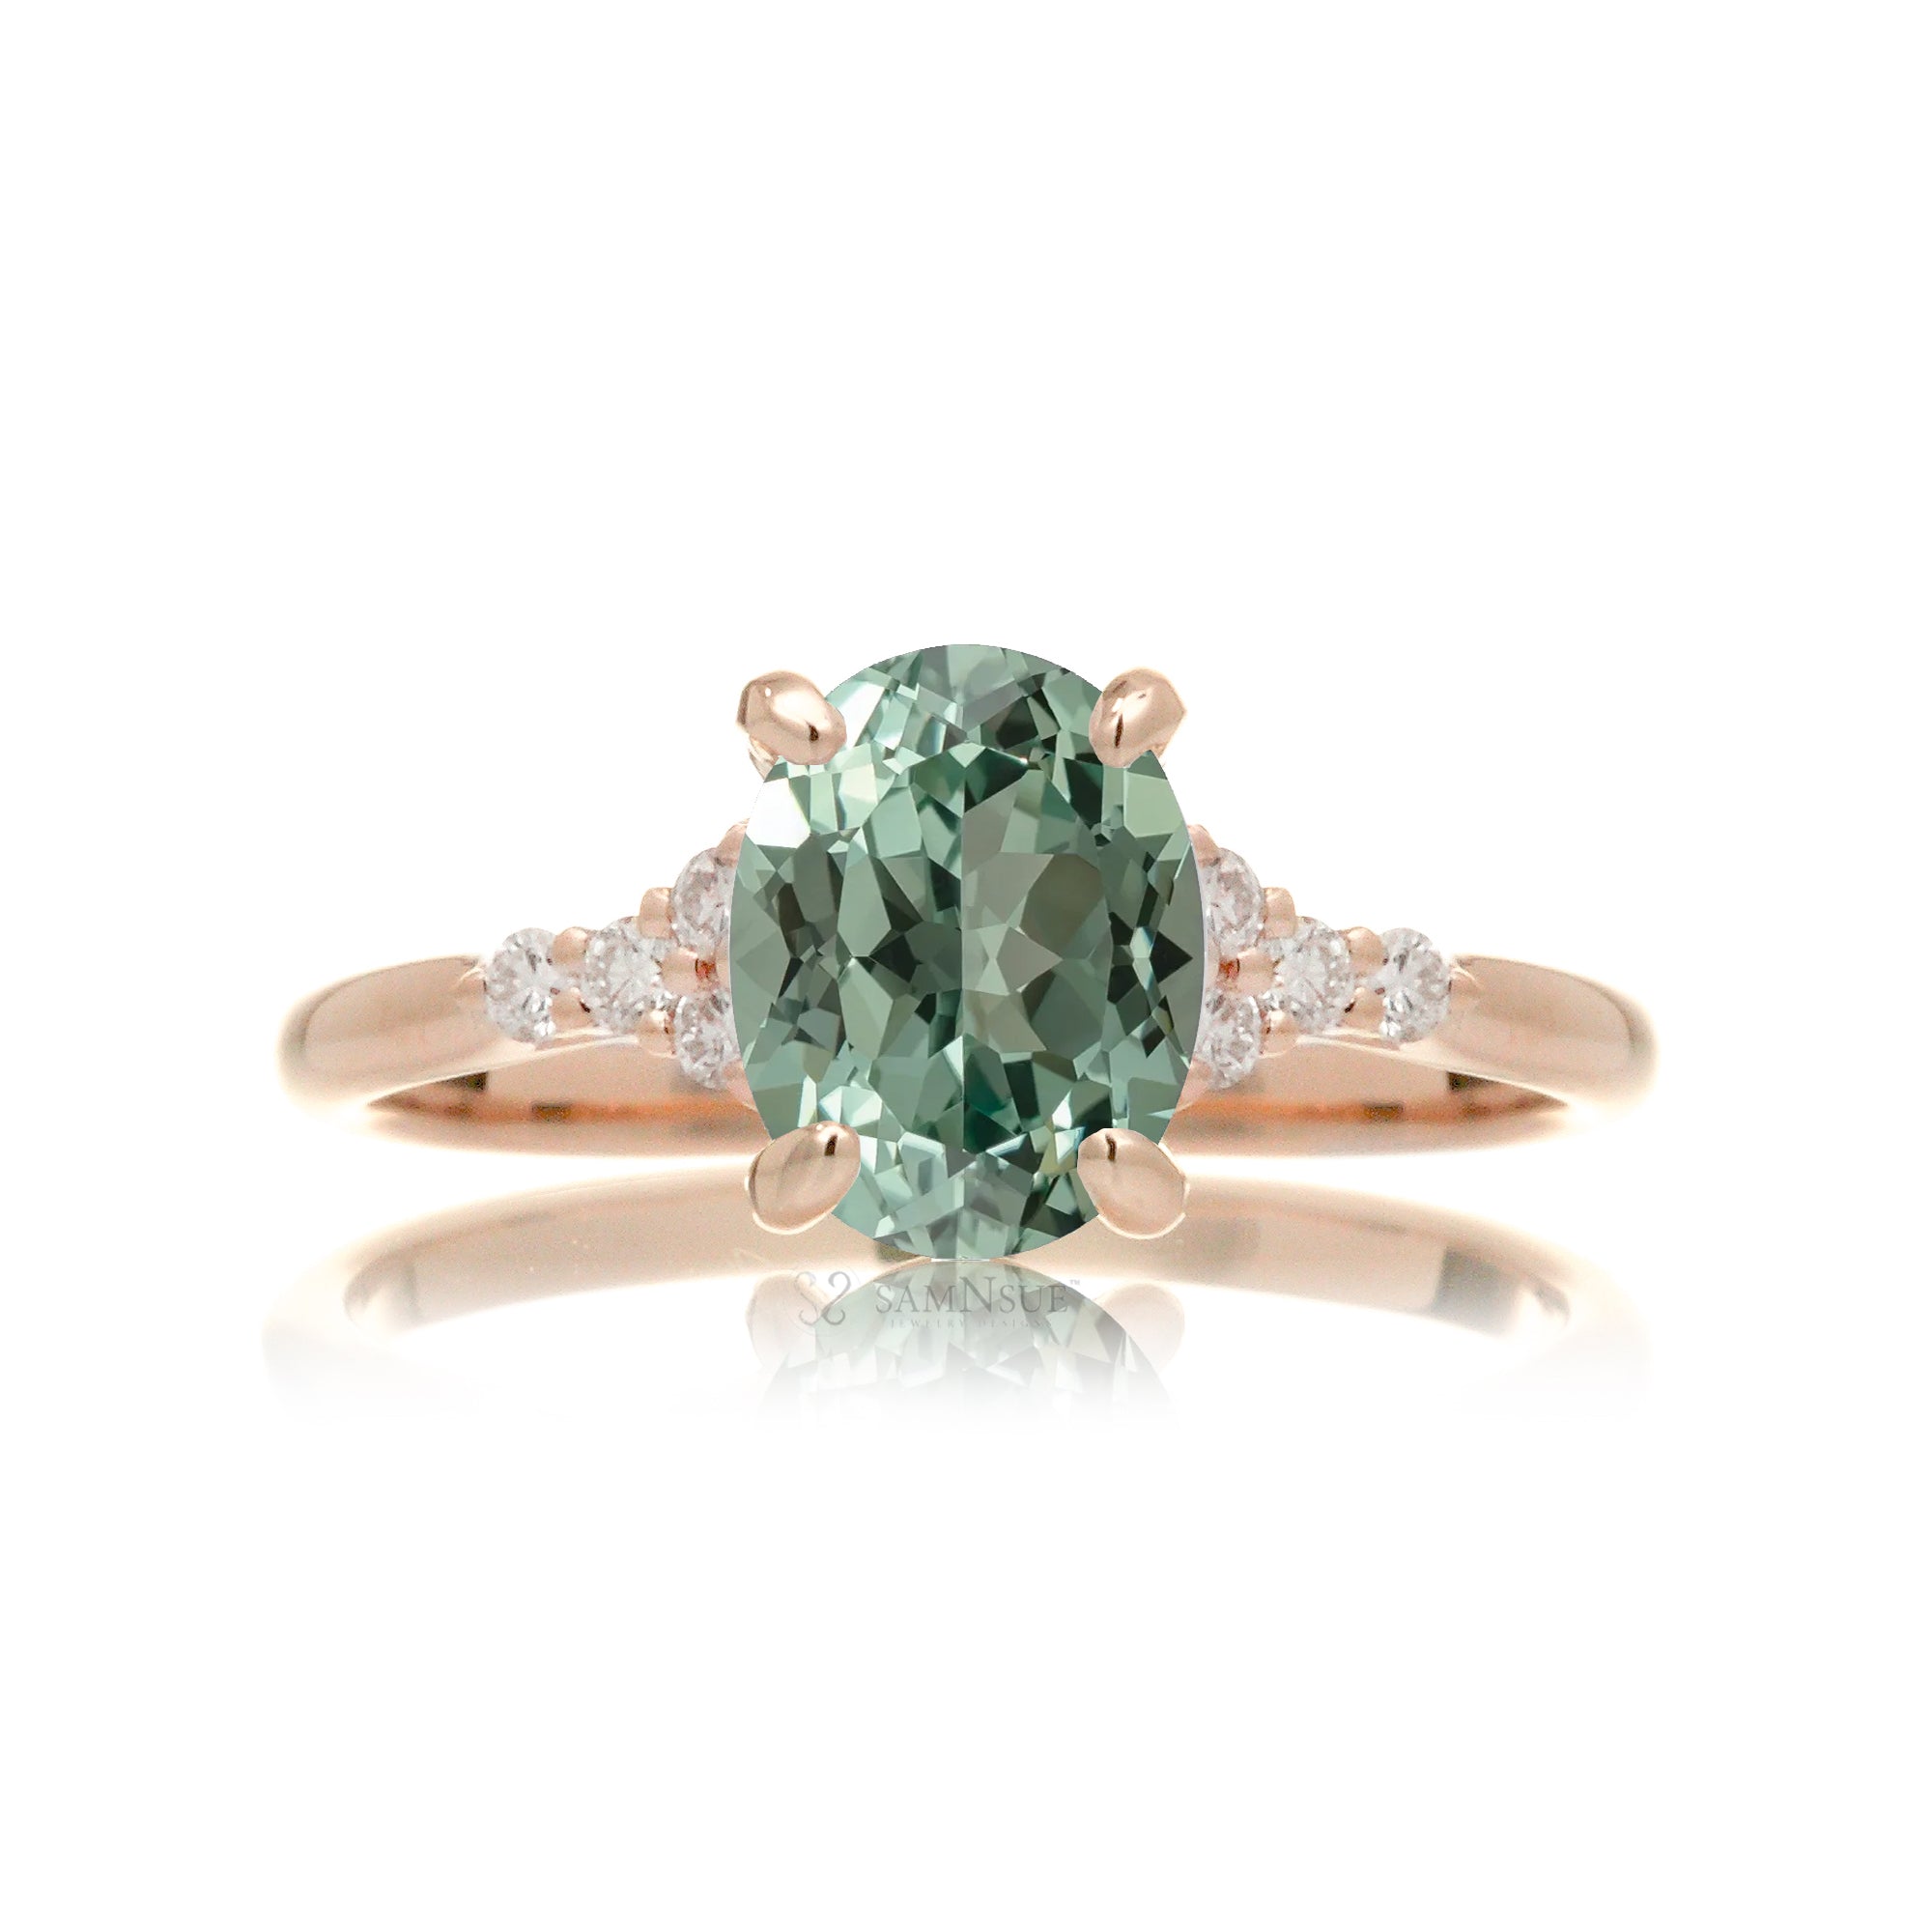 Oval green sapphire diamond ring in rose gold with a comfort fit band - the Chloe ring